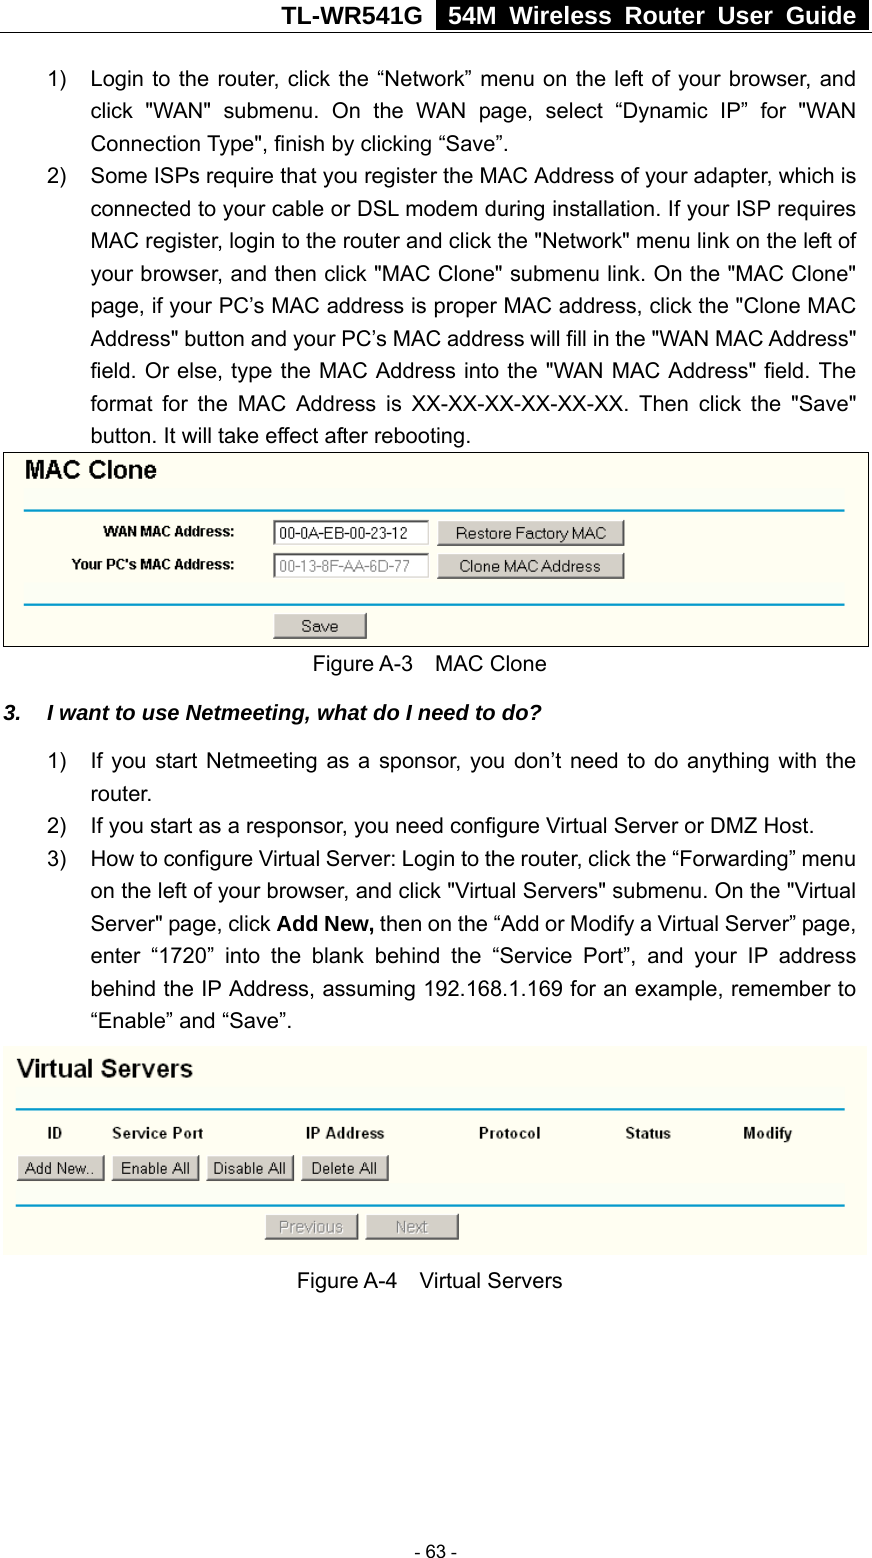 TL-WR541G   54M Wireless Router User Guide  1)  Login to the router, click the “Network” menu on the left of your browser, and click &quot;WAN&quot; submenu. On the WAN page, select “Dynamic IP” for &quot;WAN Connection Type&quot;, finish by clicking “Save”. 2)  Some ISPs require that you register the MAC Address of your adapter, which is connected to your cable or DSL modem during installation. If your ISP requires MAC register, login to the router and click the &quot;Network&quot; menu link on the left of your browser, and then click &quot;MAC Clone&quot; submenu link. On the &quot;MAC Clone&quot; page, if your PC’s MAC address is proper MAC address, click the &quot;Clone MAC Address&quot; button and your PC’s MAC address will fill in the &quot;WAN MAC Address&quot; field. Or else, type the MAC Address into the &quot;WAN MAC Address&quot; field. The format for the MAC Address is XX-XX-XX-XX-XX-XX. Then click the &quot;Save&quot; button. It will take effect after rebooting.  Figure A-3  MAC Clone 3.  I want to use Netmeeting, what do I need to do? 1)  If you start Netmeeting as a sponsor, you don’t need to do anything with the router. 2)  If you start as a responsor, you need configure Virtual Server or DMZ Host. 3)  How to configure Virtual Server: Login to the router, click the “Forwarding” menu on the left of your browser, and click &quot;Virtual Servers&quot; submenu. On the &quot;Virtual Server&quot; page, click Add New, then on the “Add or Modify a Virtual Server” page,   enter “1720” into the blank behind the “Service Port”, and your IP address behind the IP Address, assuming 192.168.1.169 for an example, remember to “Enable” and “Save”.    Figure A-4  Virtual Servers  - 63 - 